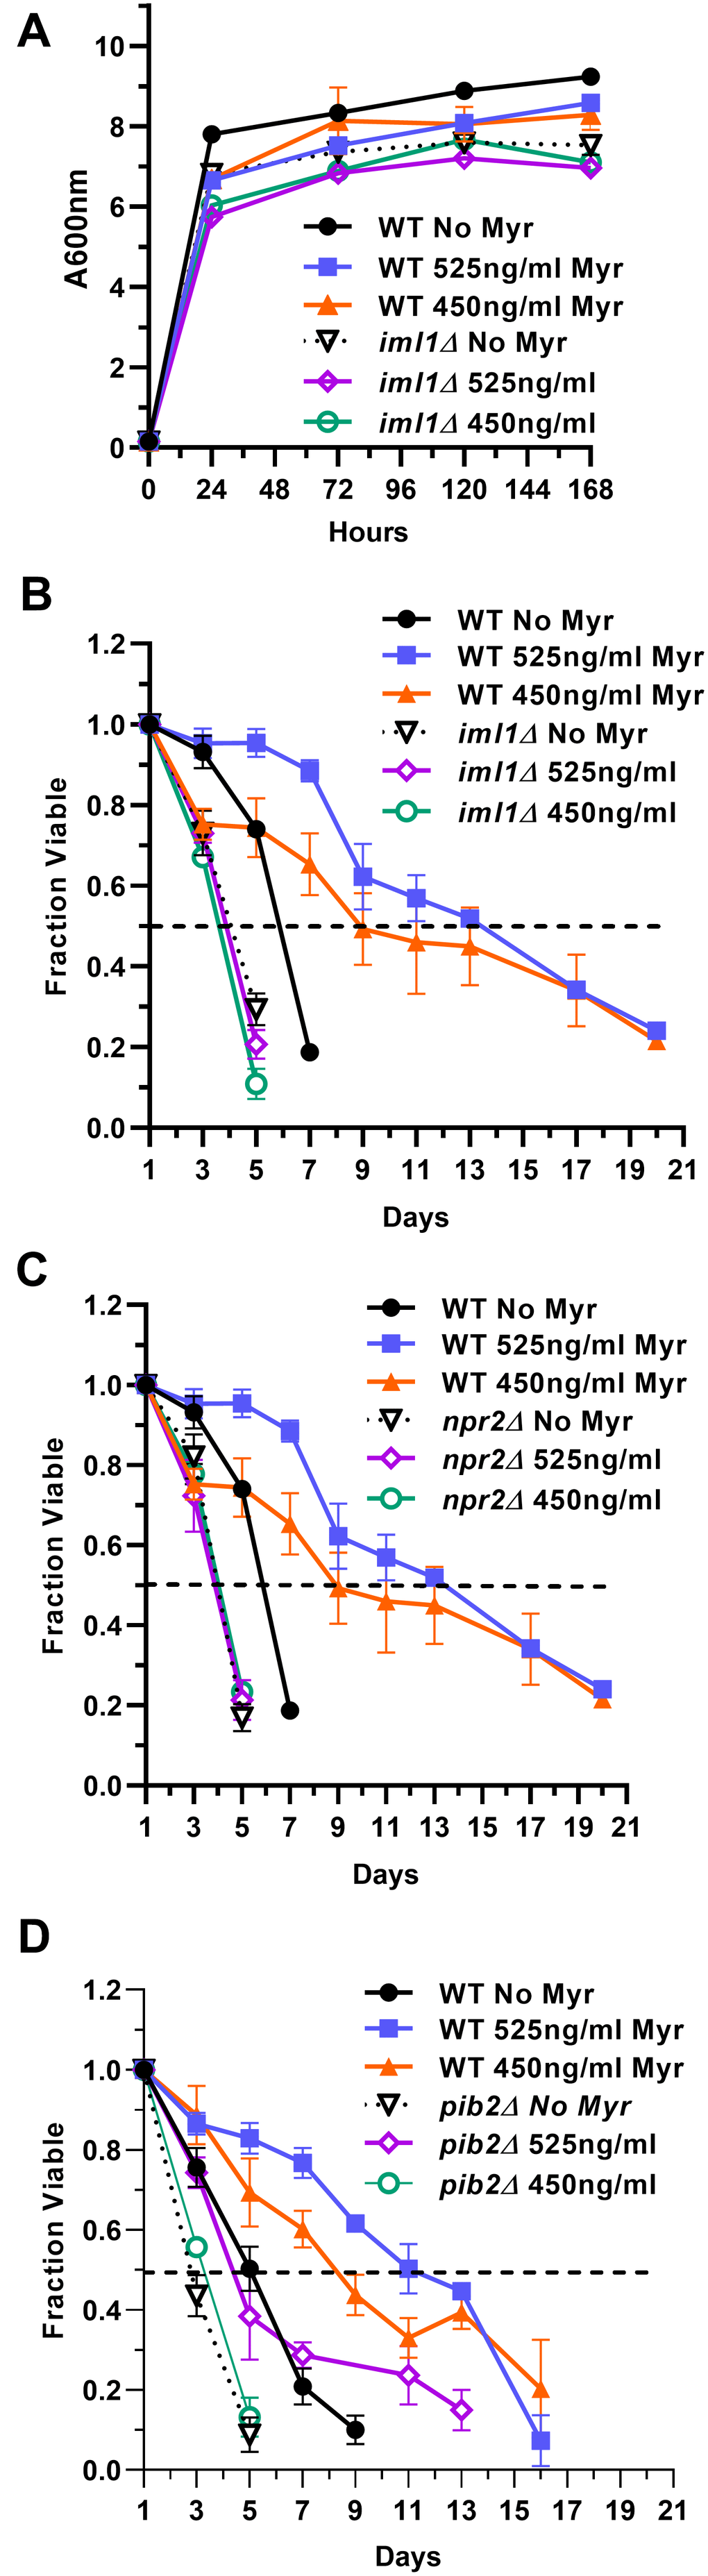 The Pib2 and Gtr1/2 pathways sense amino acid pools to control TORC1 activity and increase lifespan in Myr-treated cells. (A) Growth rate and cell density of indicated strains with or without Myr treatment. (B, C) The role of the Gtr1/2 pathway in lifespan was examined by measuring the viability of prototrophic WT BY4741, iml1∆ and npr2∆ cells, with and without Myr treatment, over time. (D) The role of the Pib2 pathway in lifespan was examined by measuring the viability of prototrophic BY4741 and pib2∆ cells, with and without Myr treatment, over time.